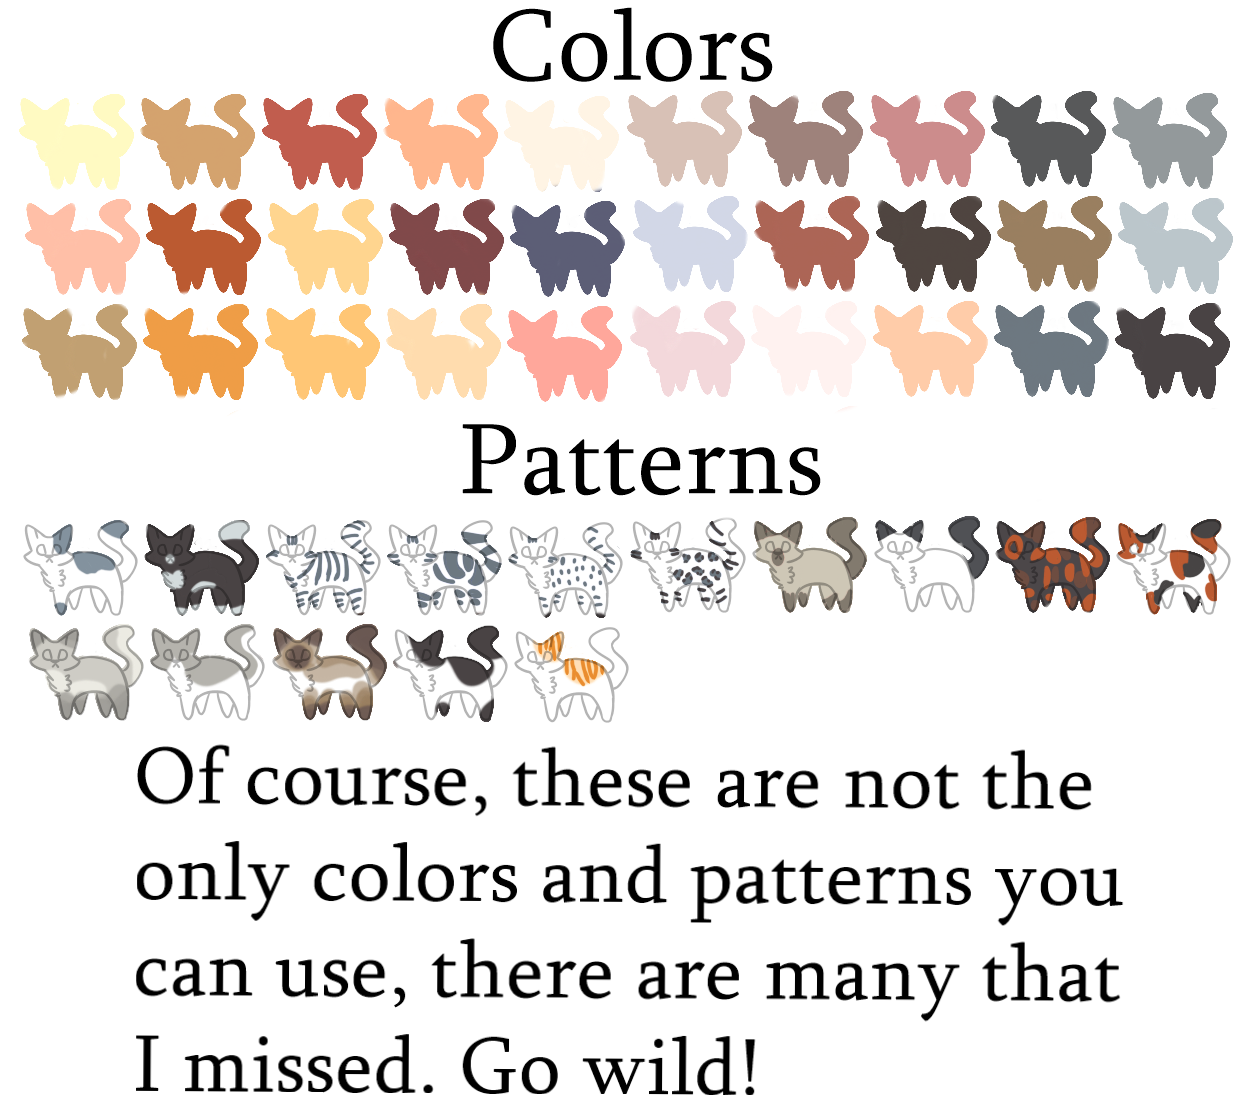 55 HQ Photos Different Cat Colors And Patterns : Color Patterns Of